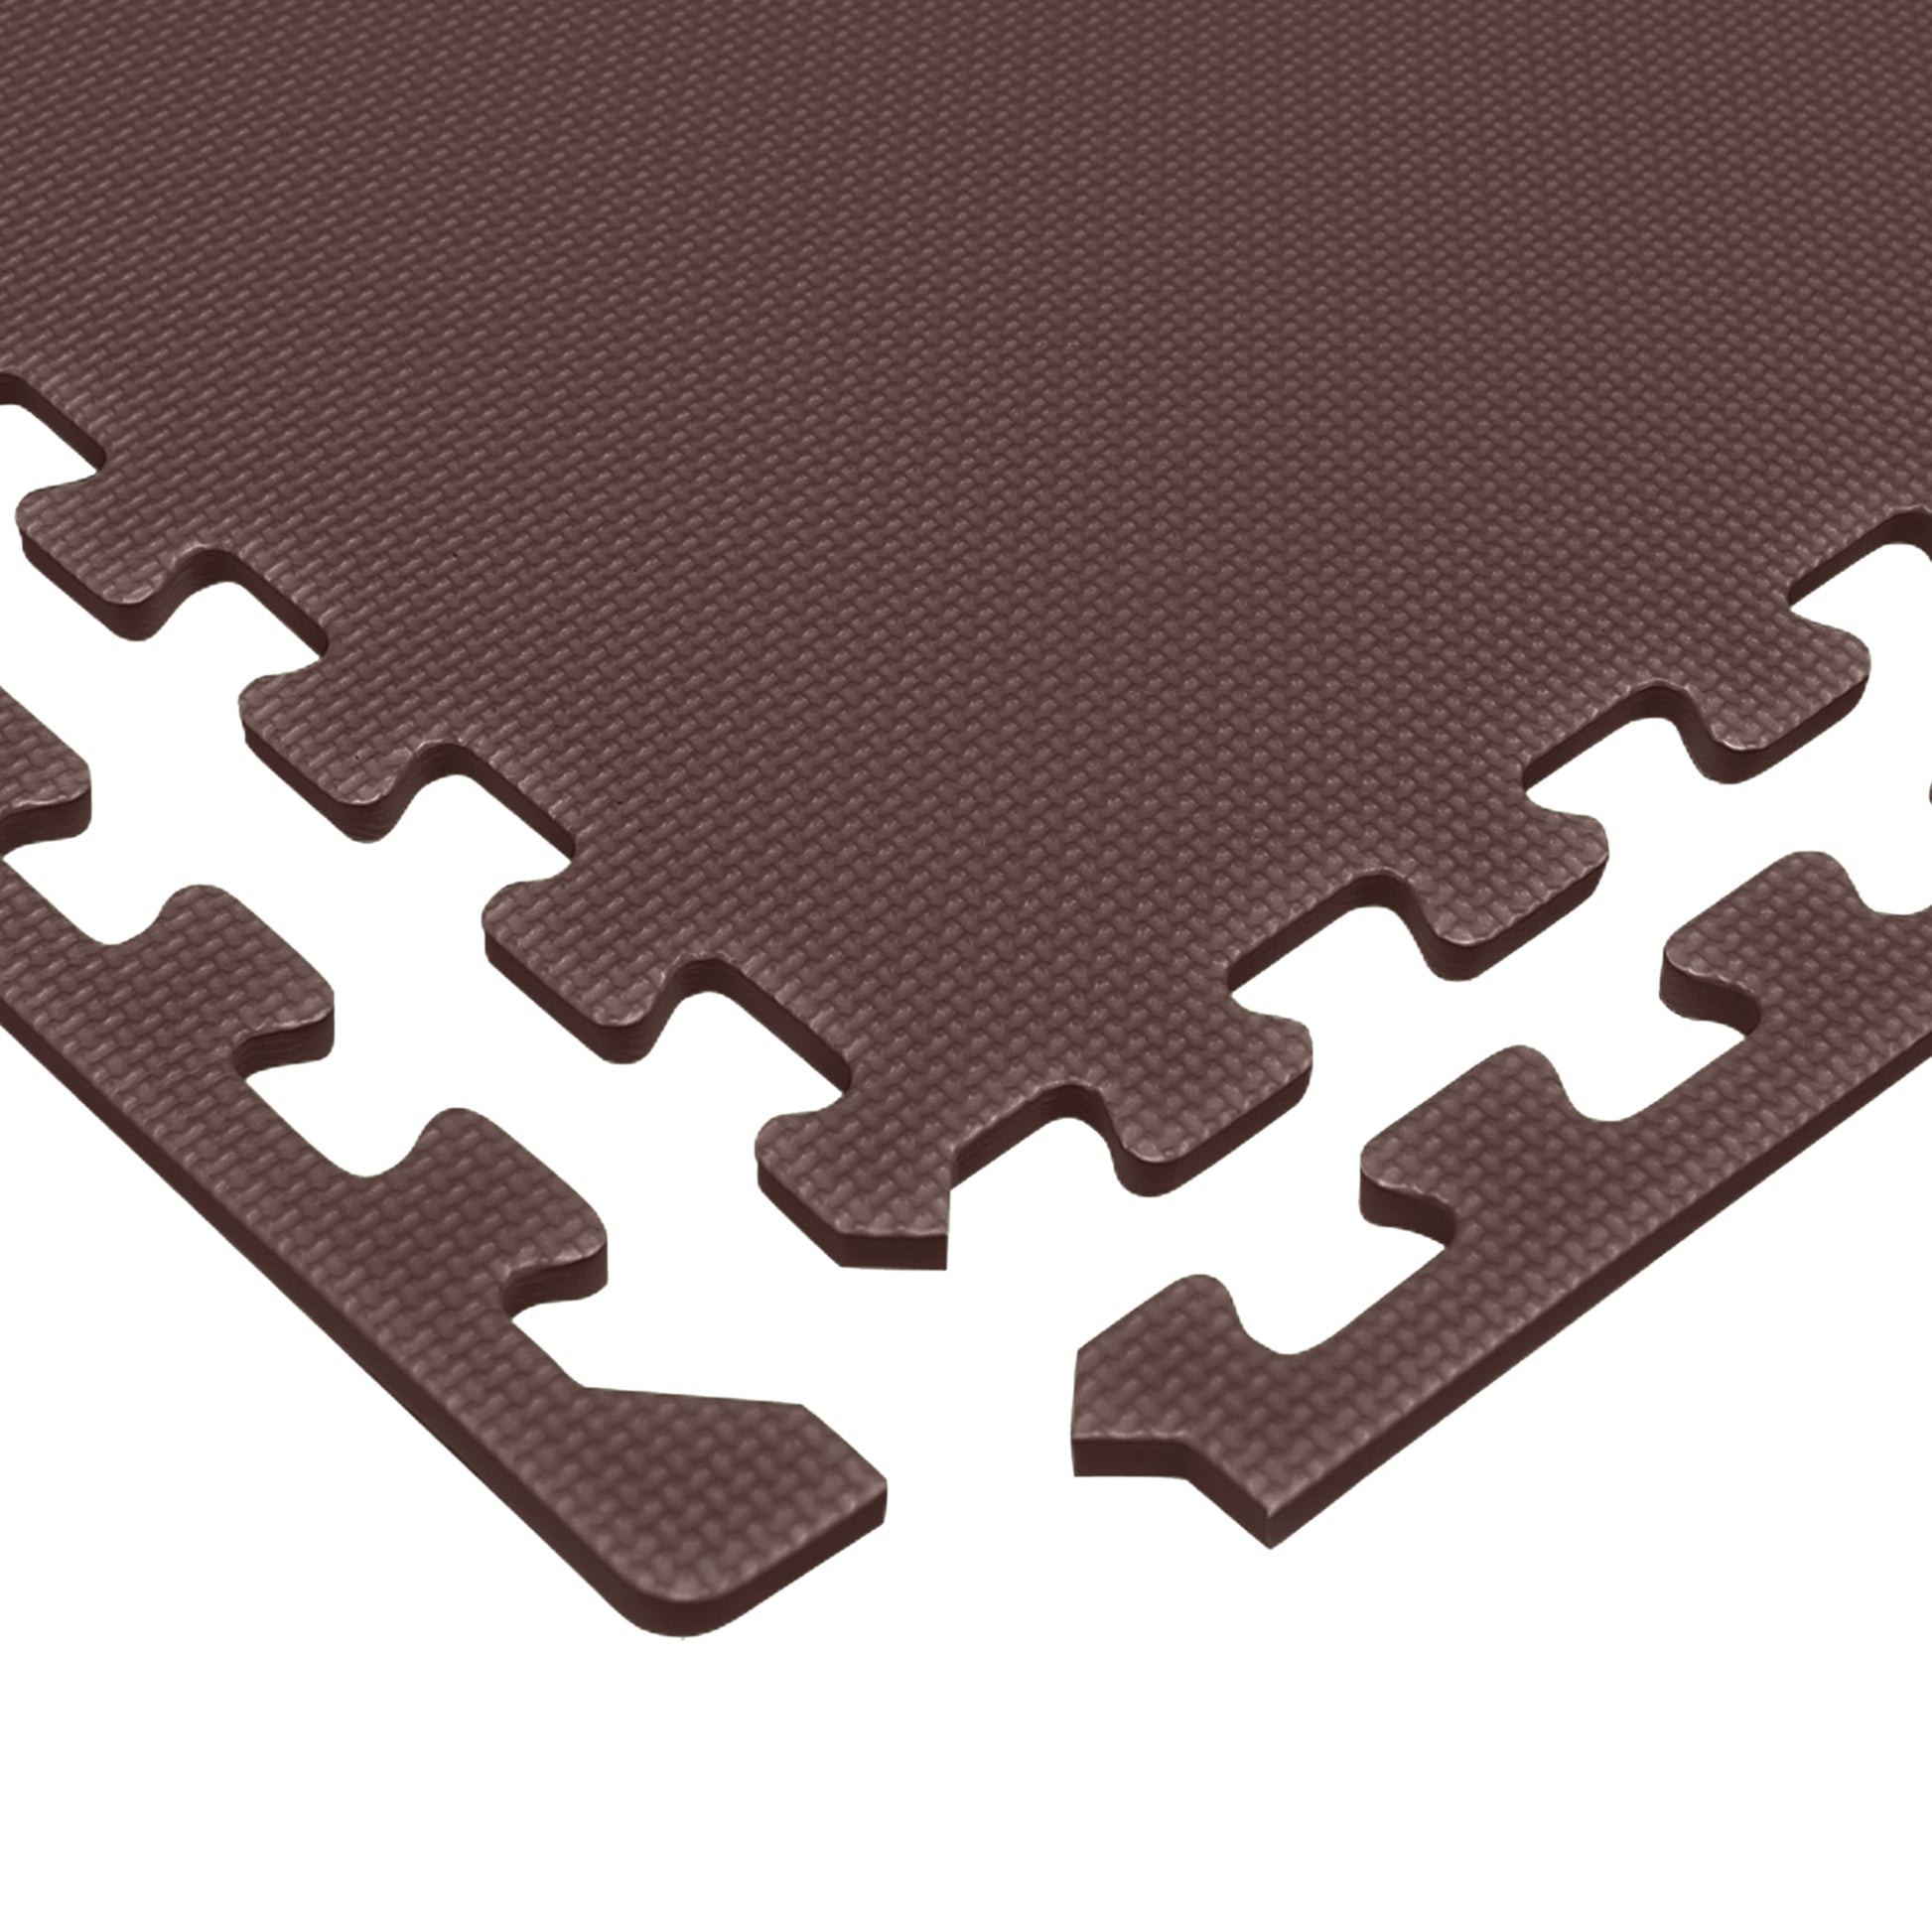 Sky Solutions Anti Fatigue Cushioned 3/4 inch Floor Mat, 20 x 39, Chocolate Brown